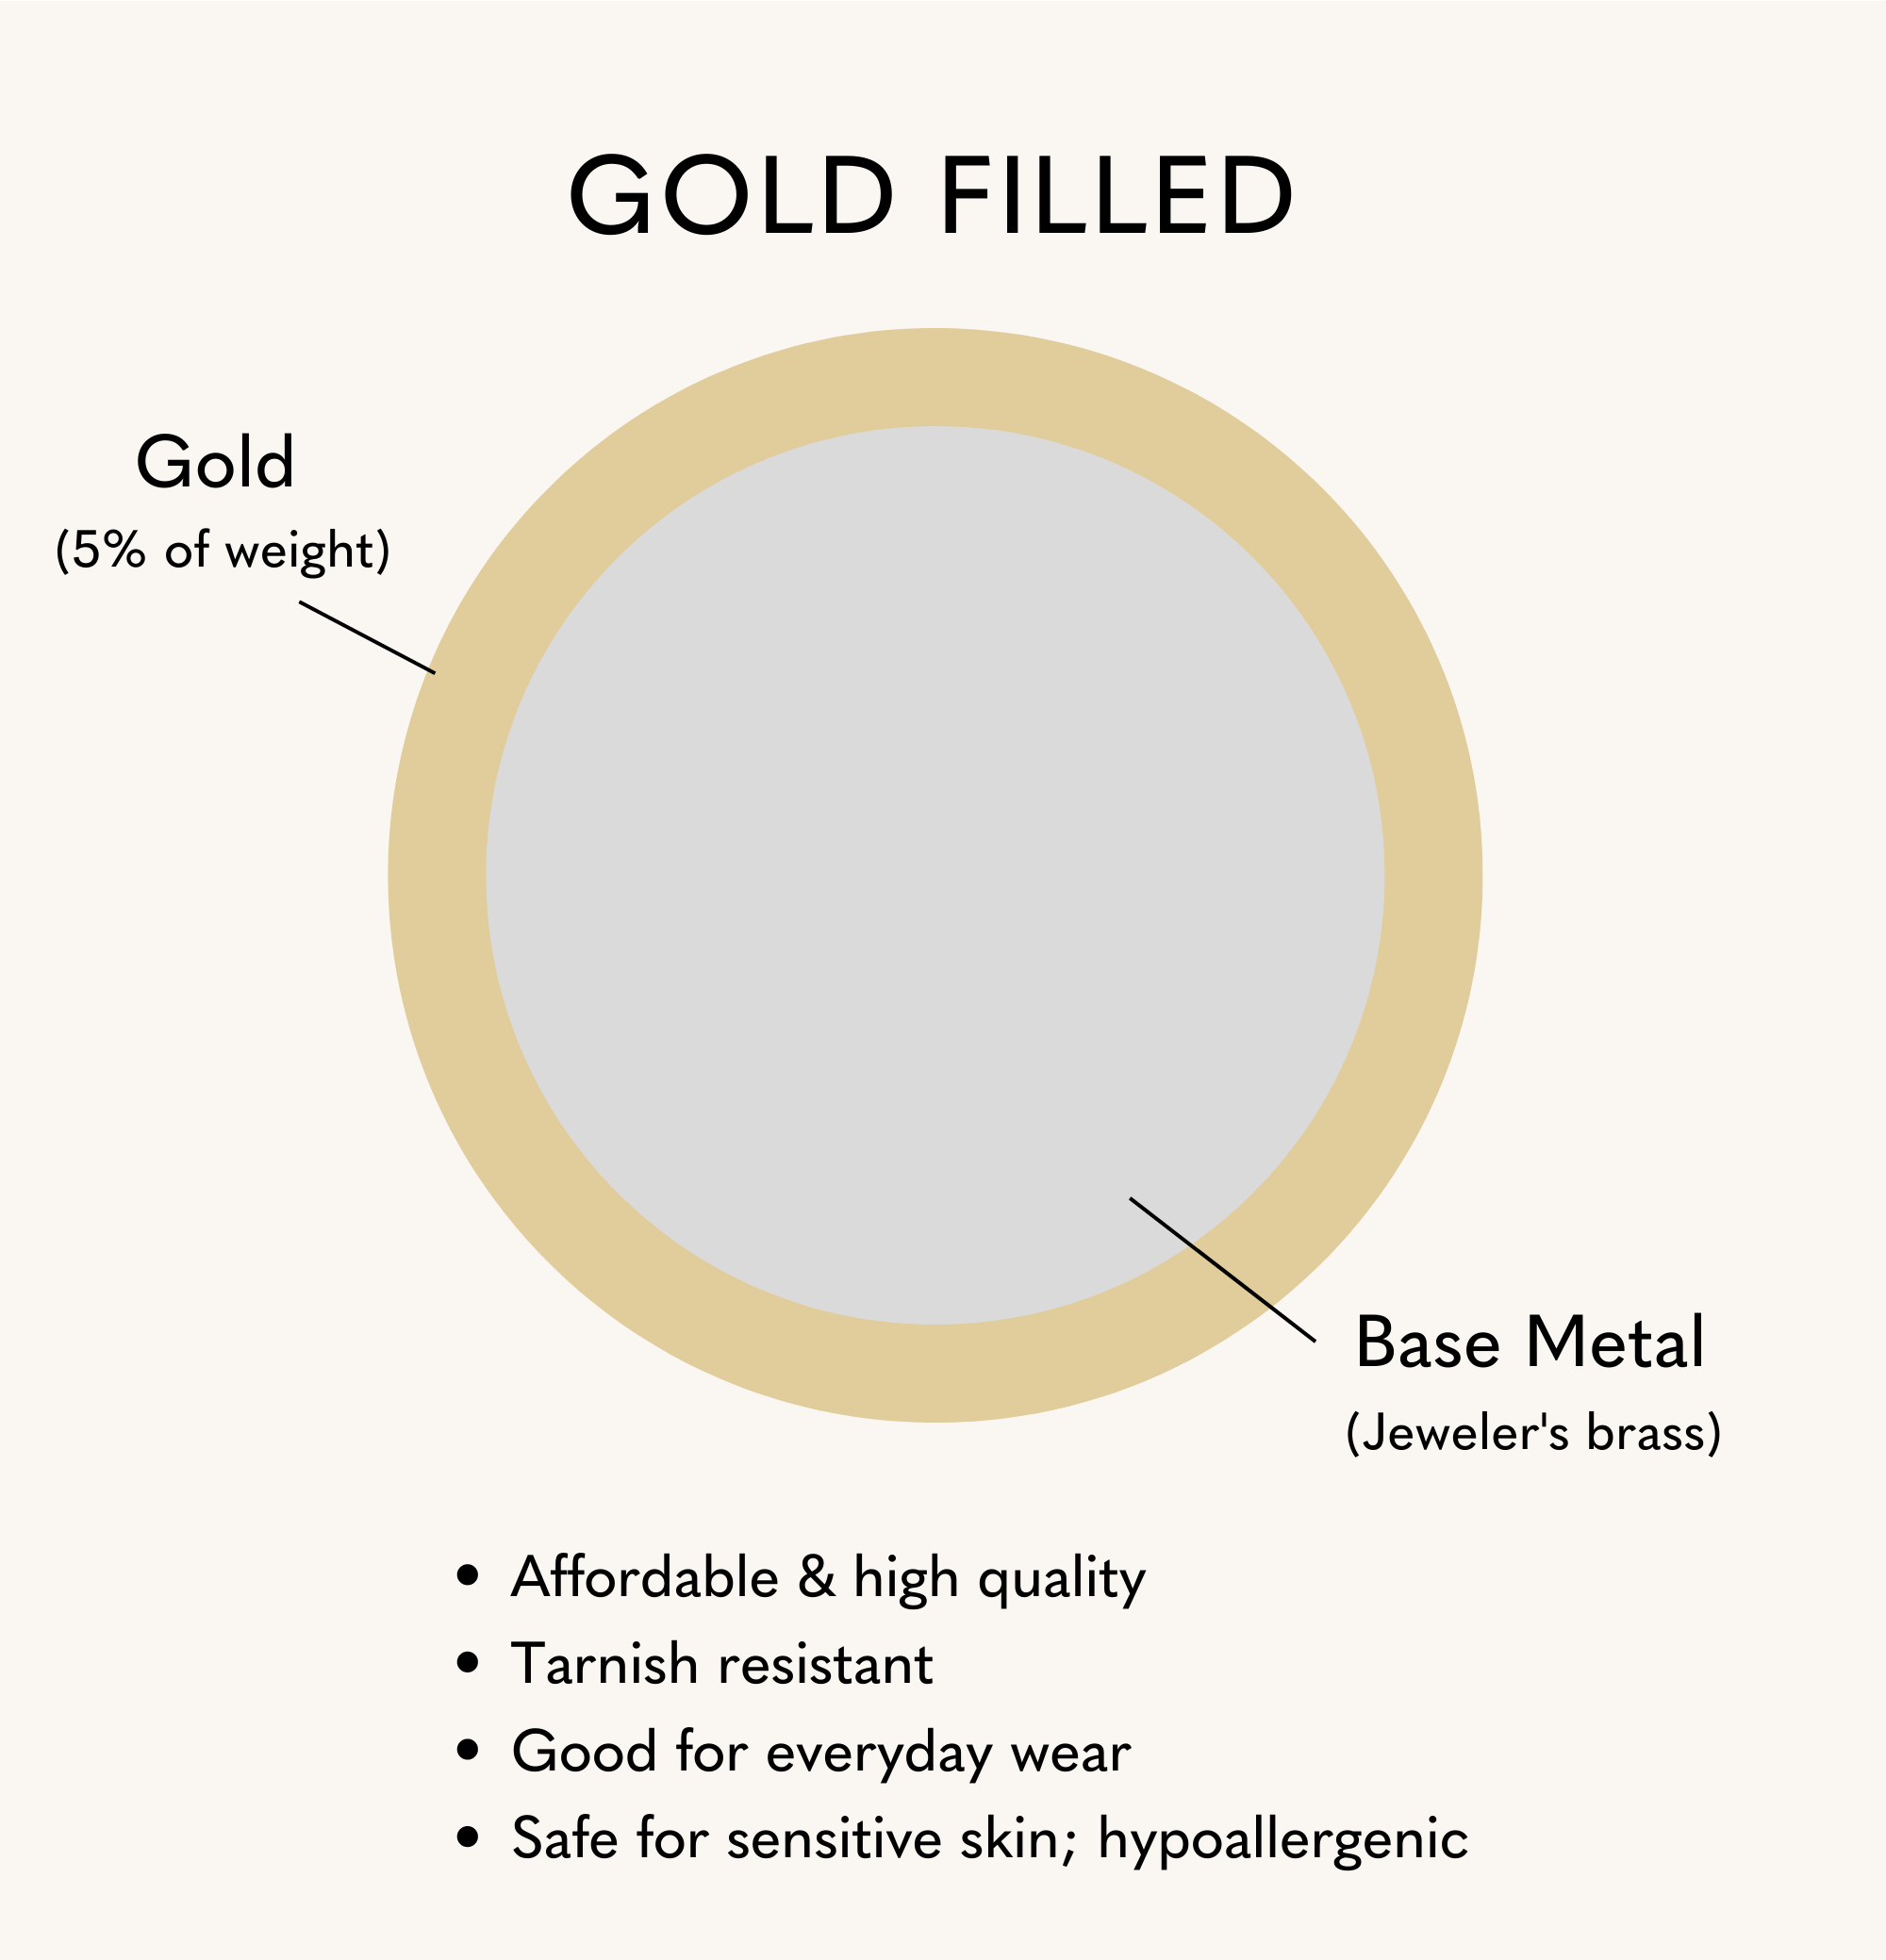 What is gold filled?